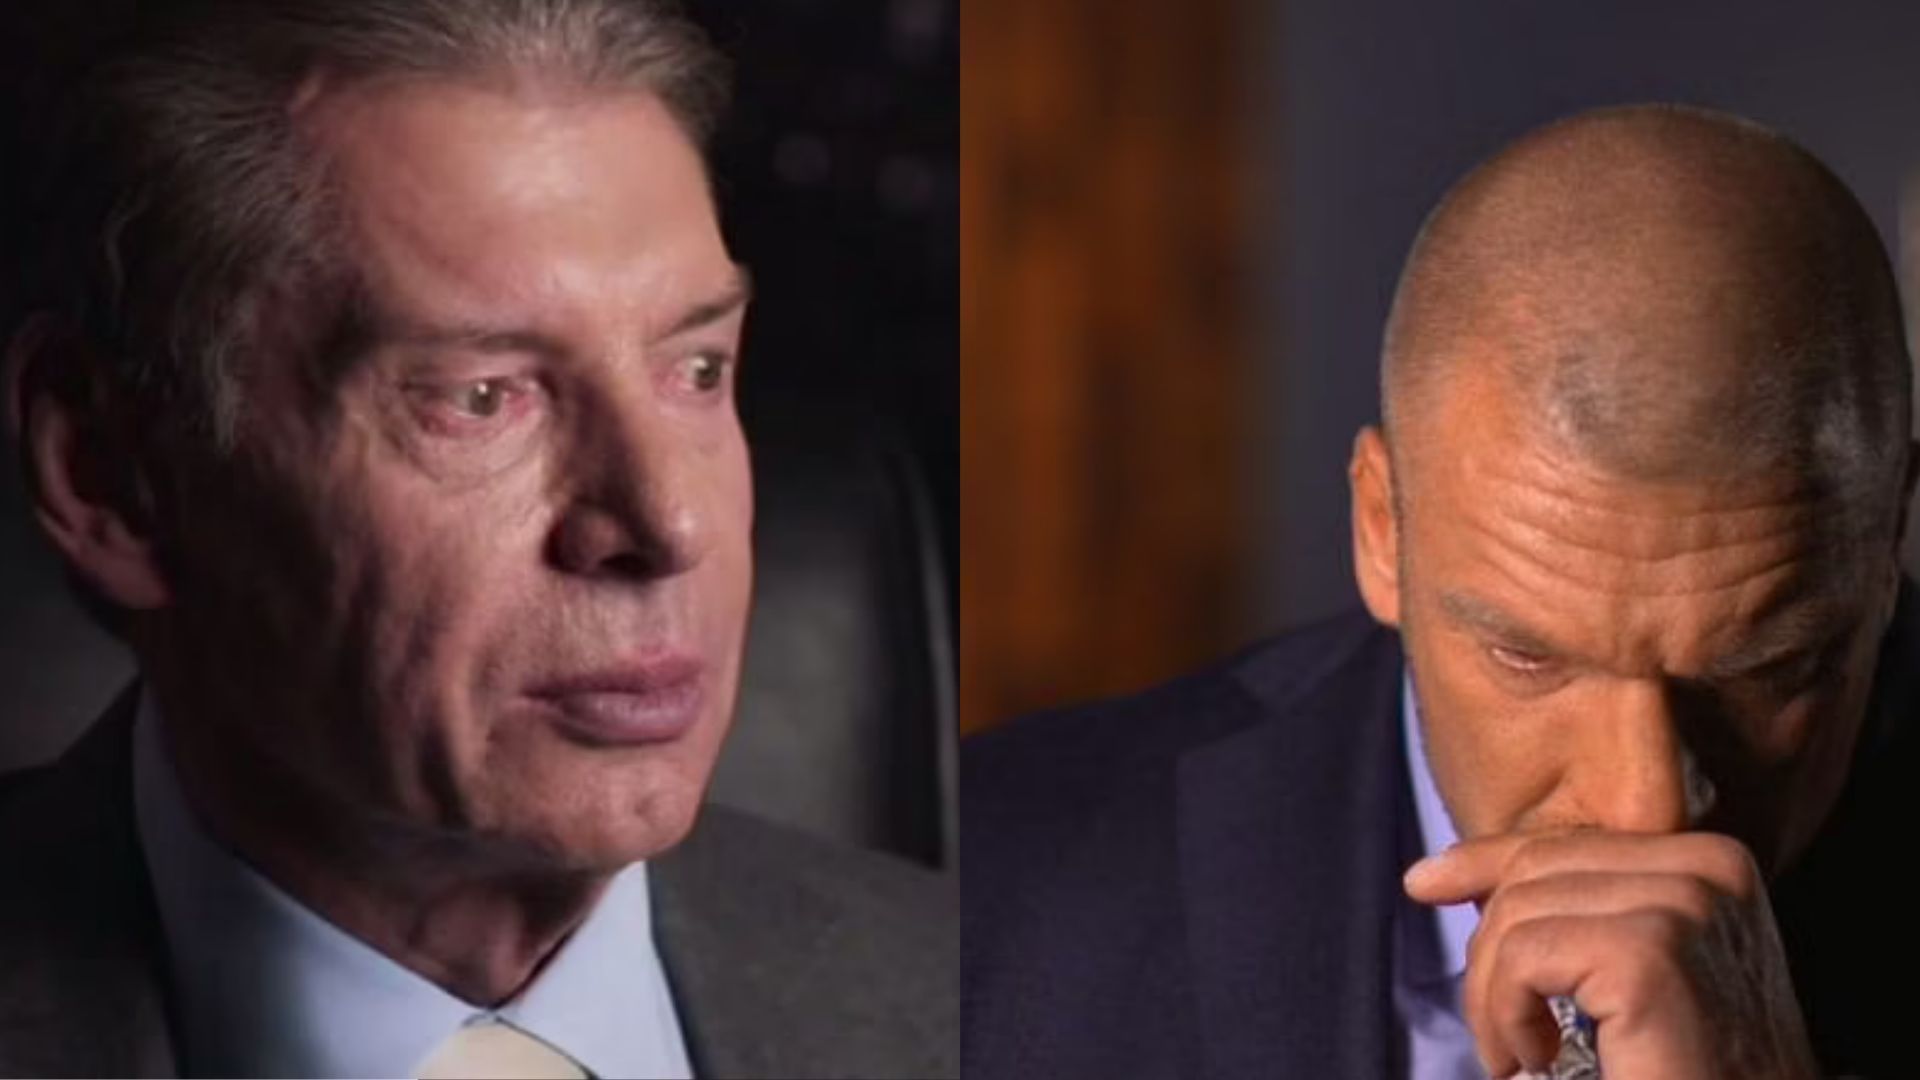 WWE Referee Marty Elias was thanked by Vince McMahon for helping Triple H